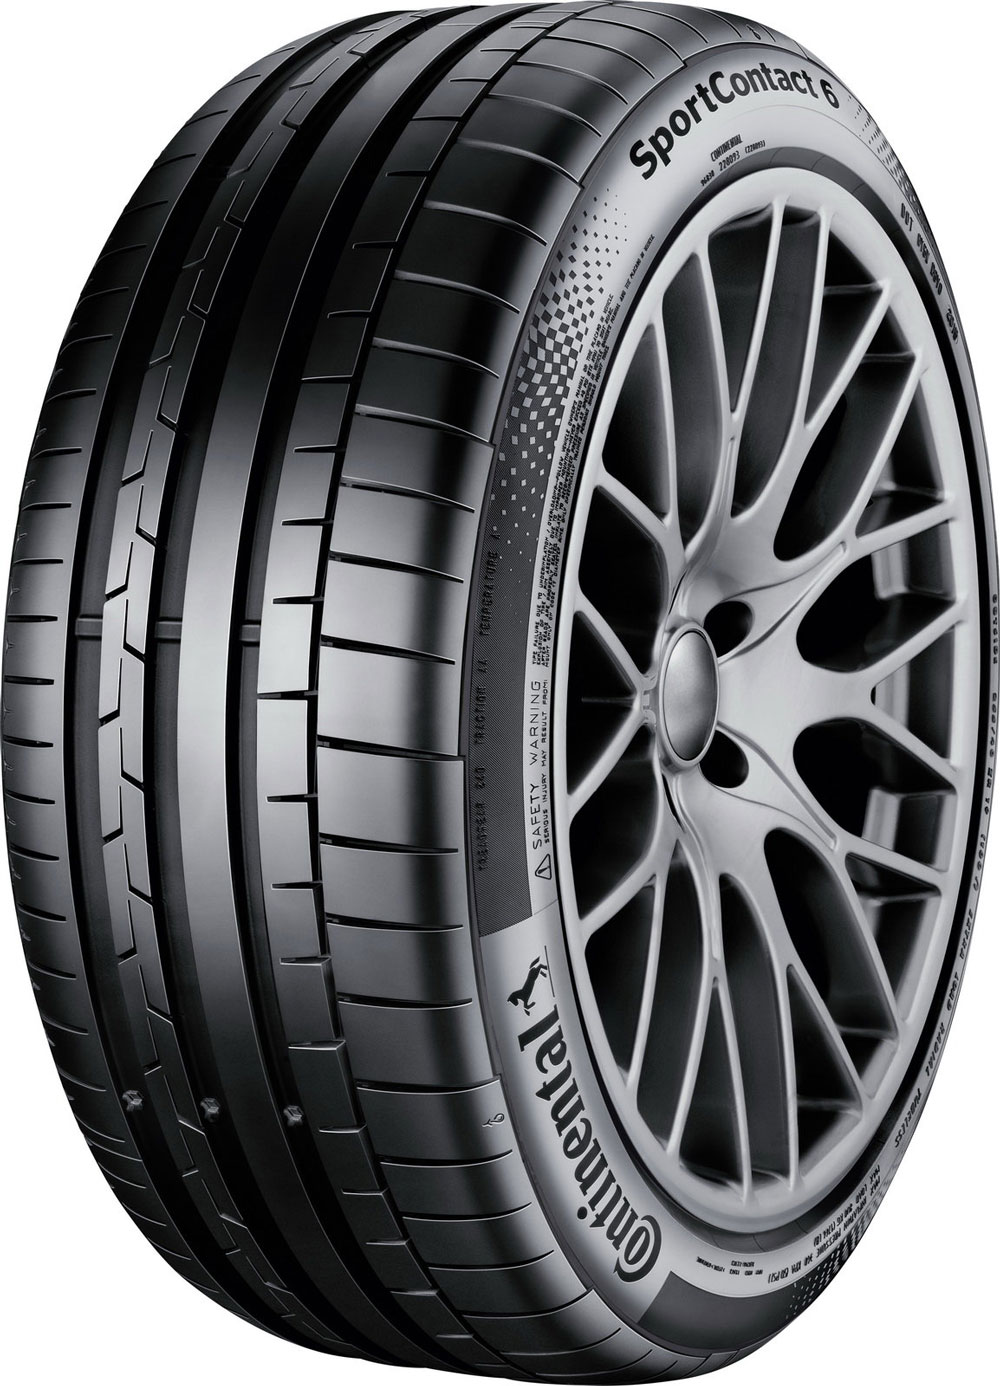 CONTINENTAL SPORT CONTACT 6 XL FP 265/35 R22 102Y